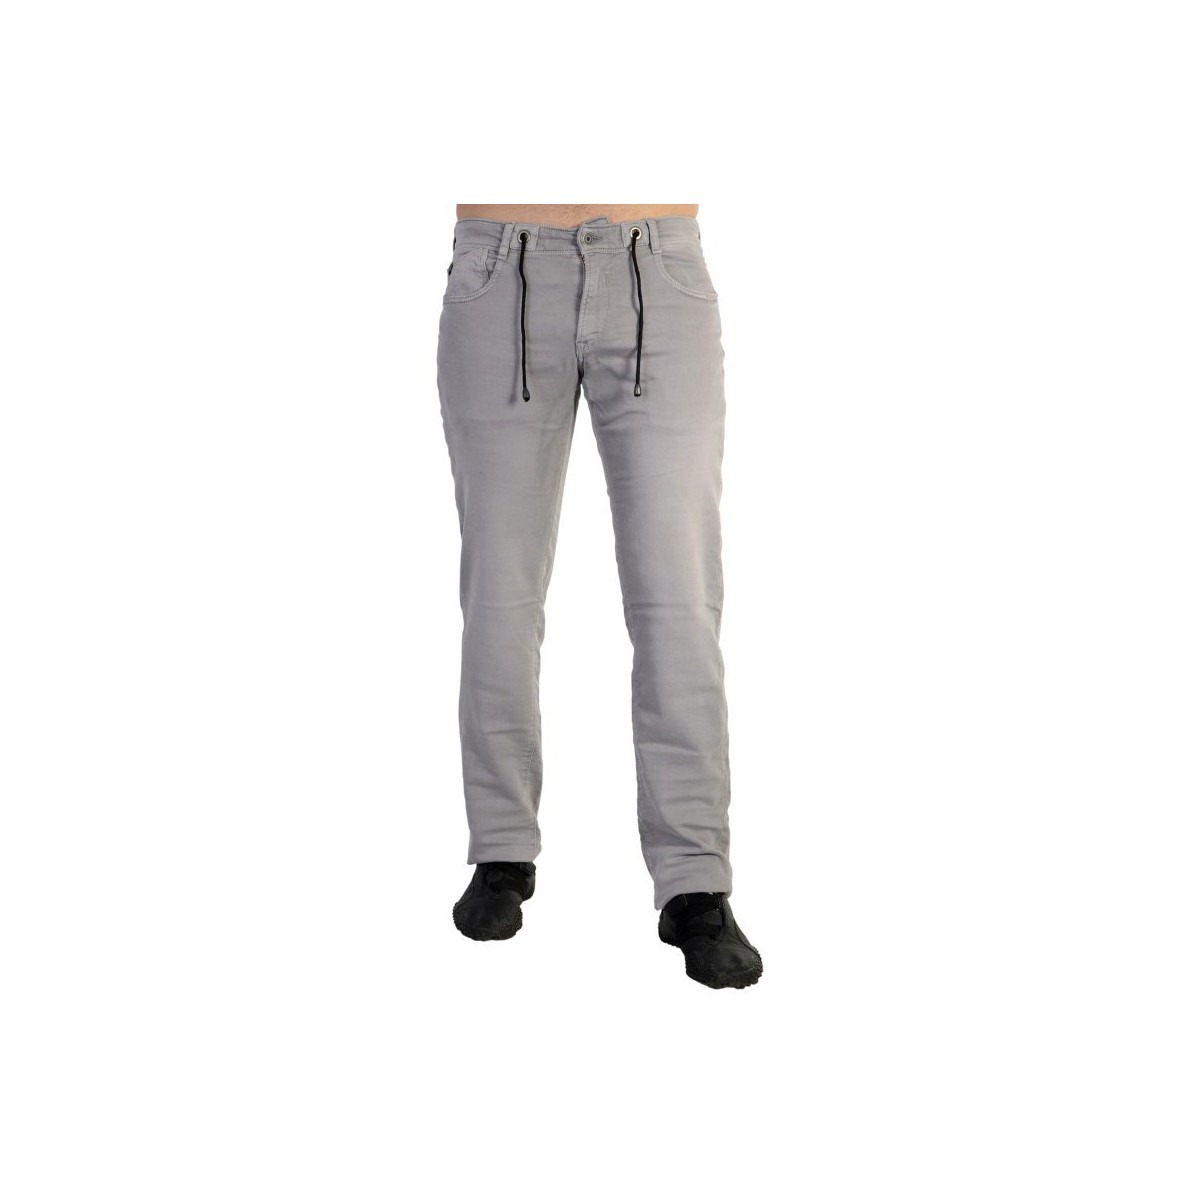 Spartoo Gent Jeans in Beige from Le Temps des Cerises GOOFASH